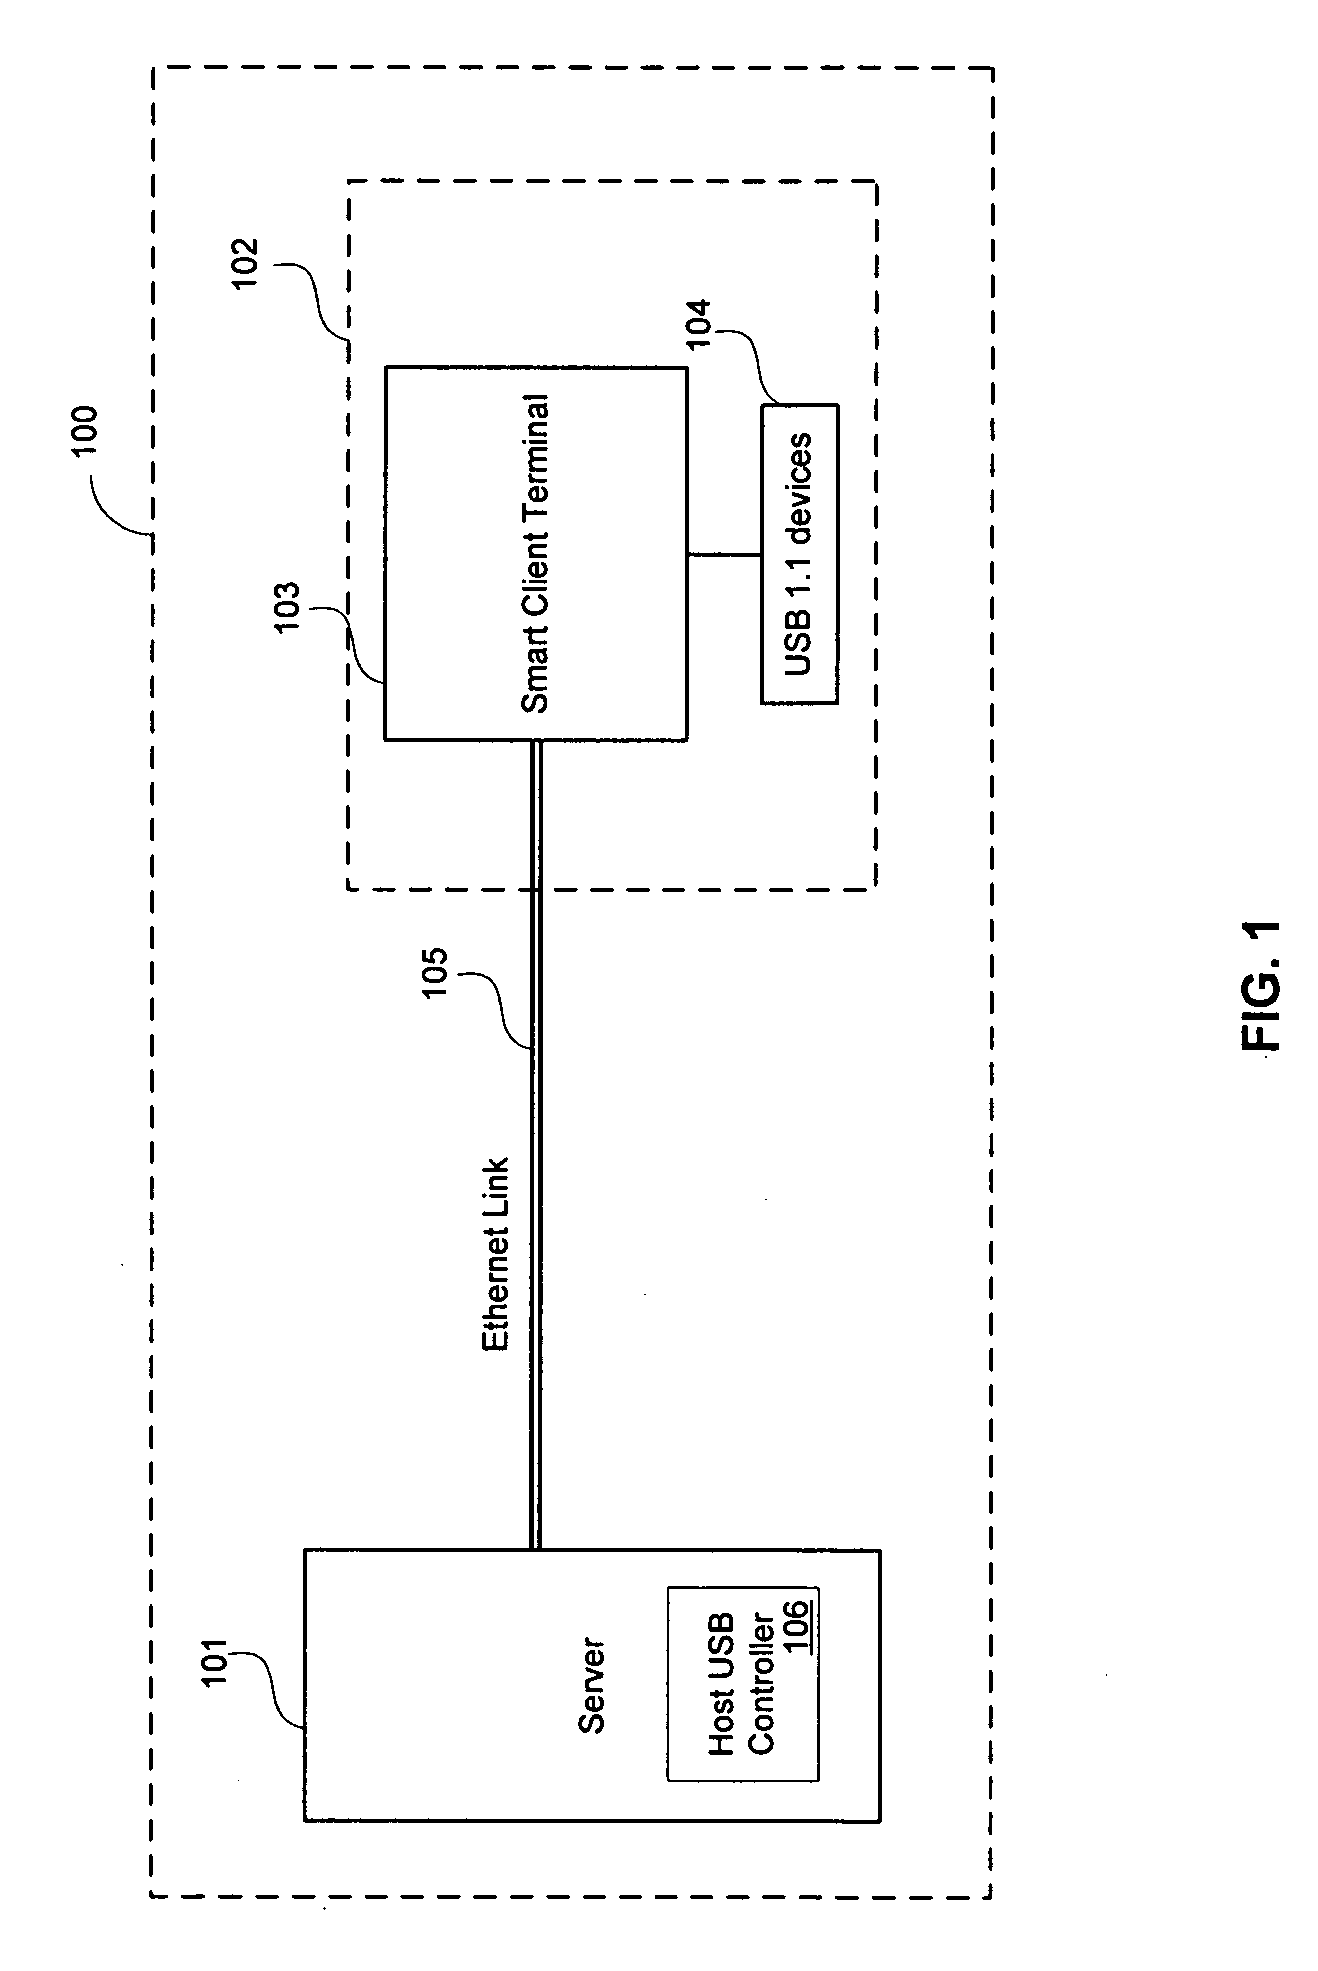 Method and system for hardware based implementation of USB 1.1 over a high speed link